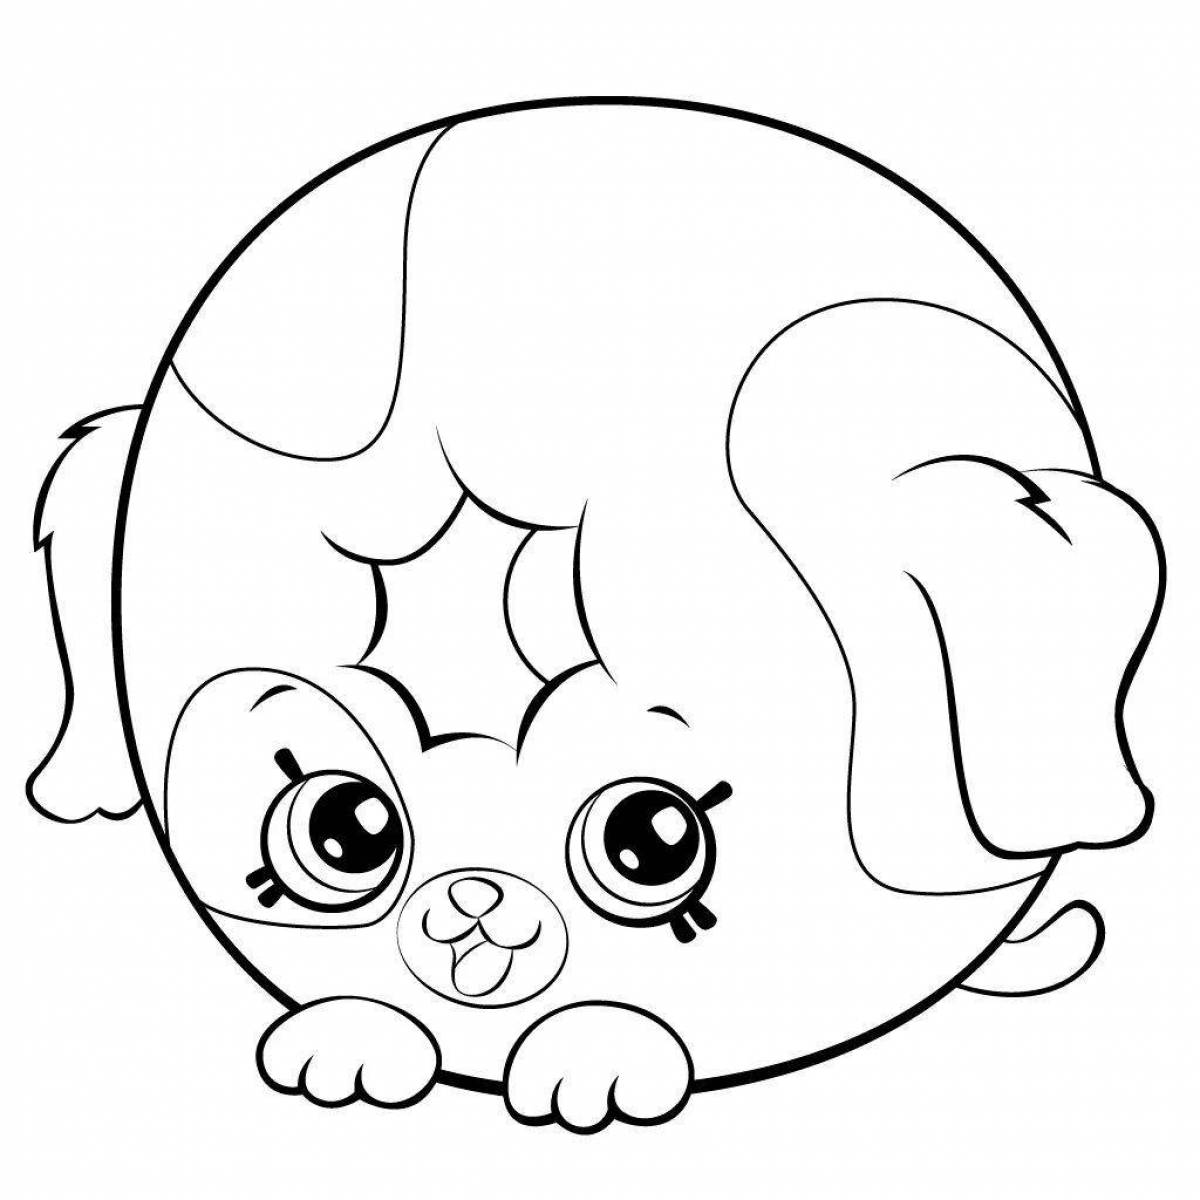 Coloring page adorable cute puppy